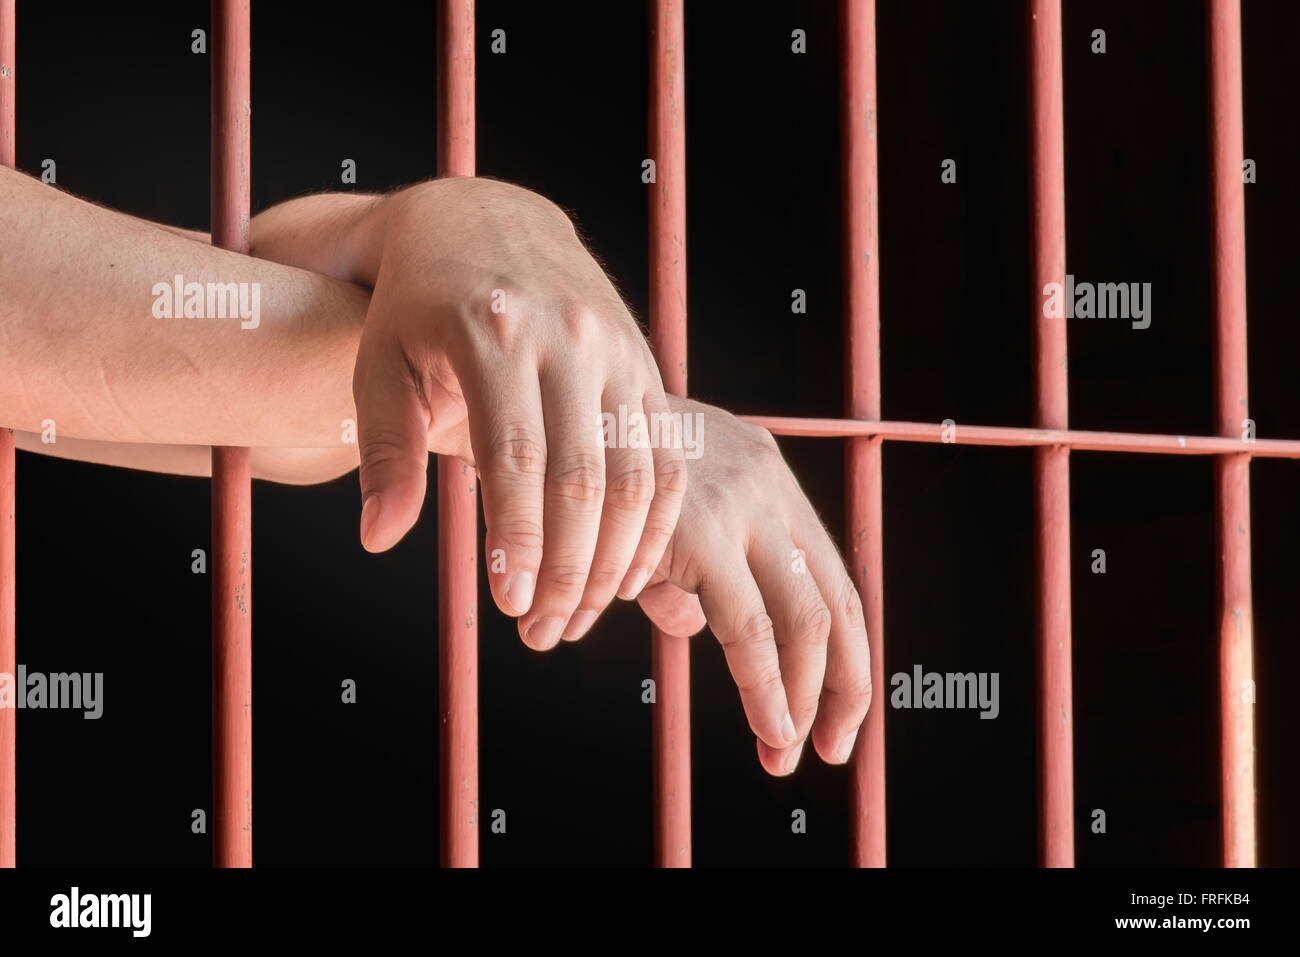 Close up hand of male muslim hanging on bar in jail. Stock Photo